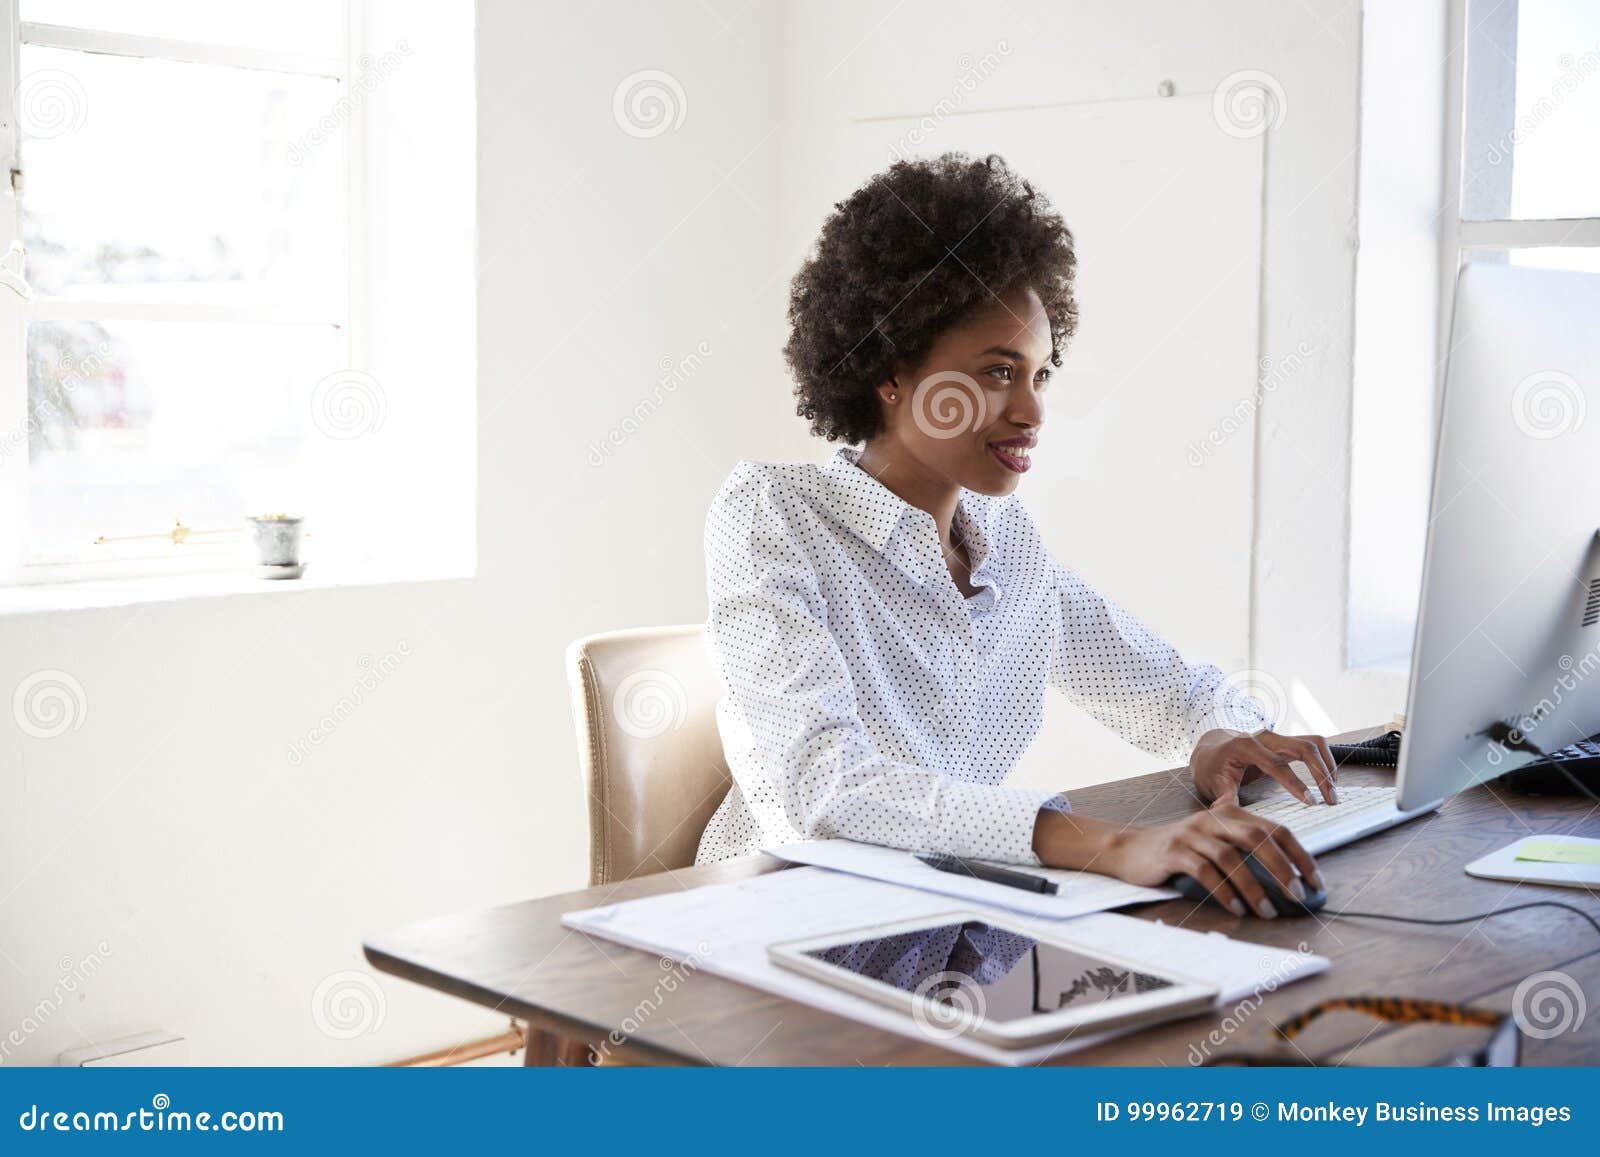 Young black business woman thinking at desk in office Stock Photo